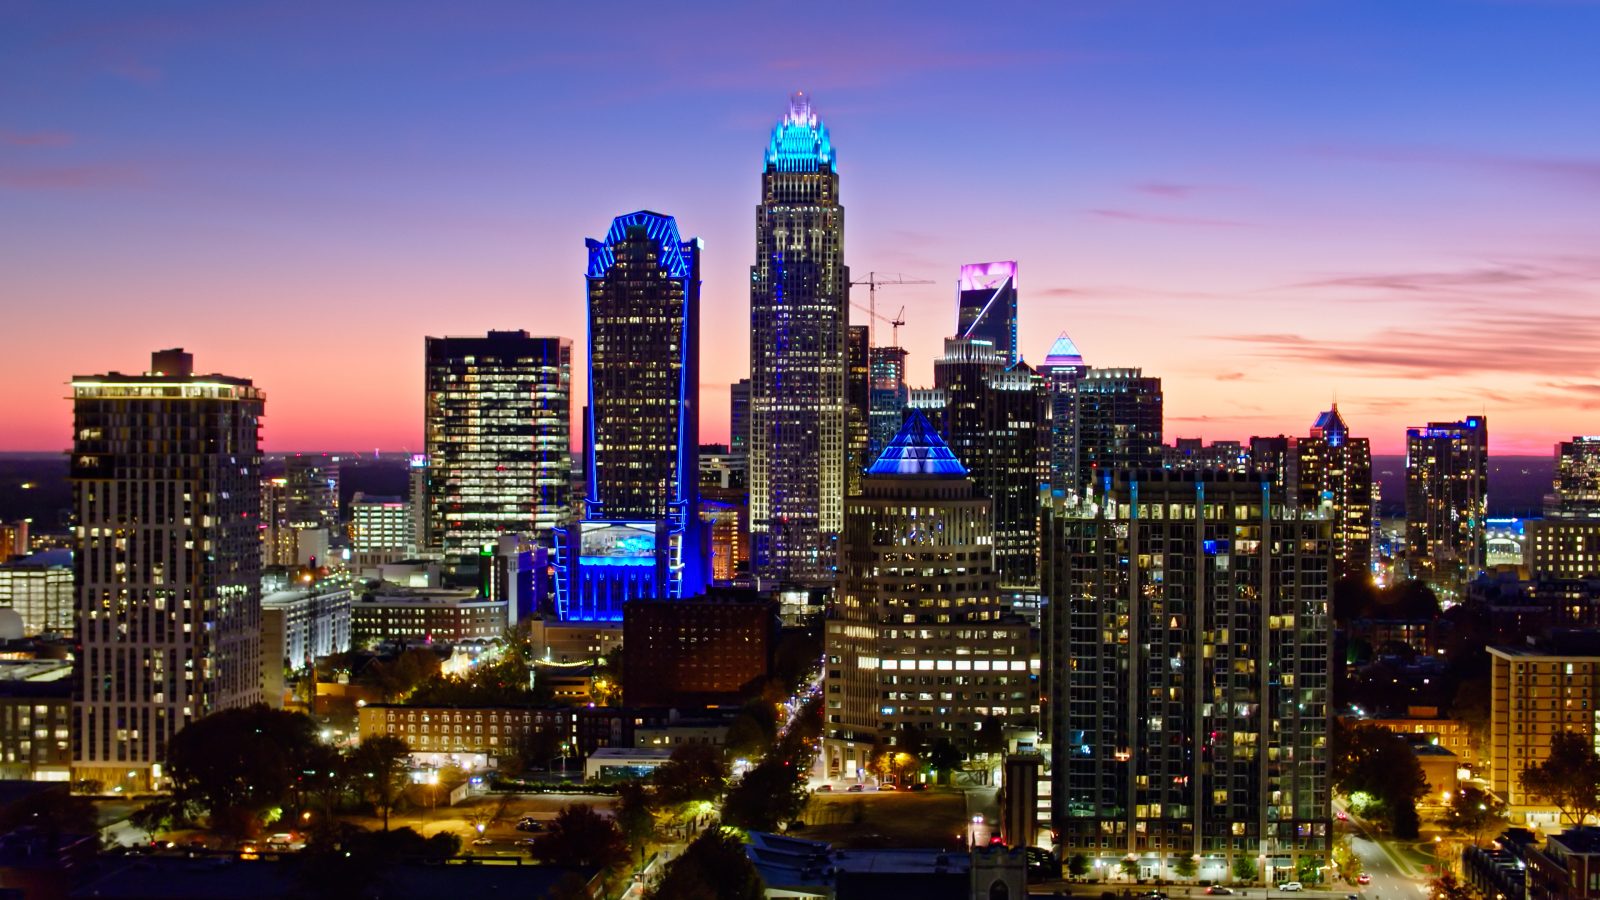 Colorful Evening in Charlotte, NC - Aerial